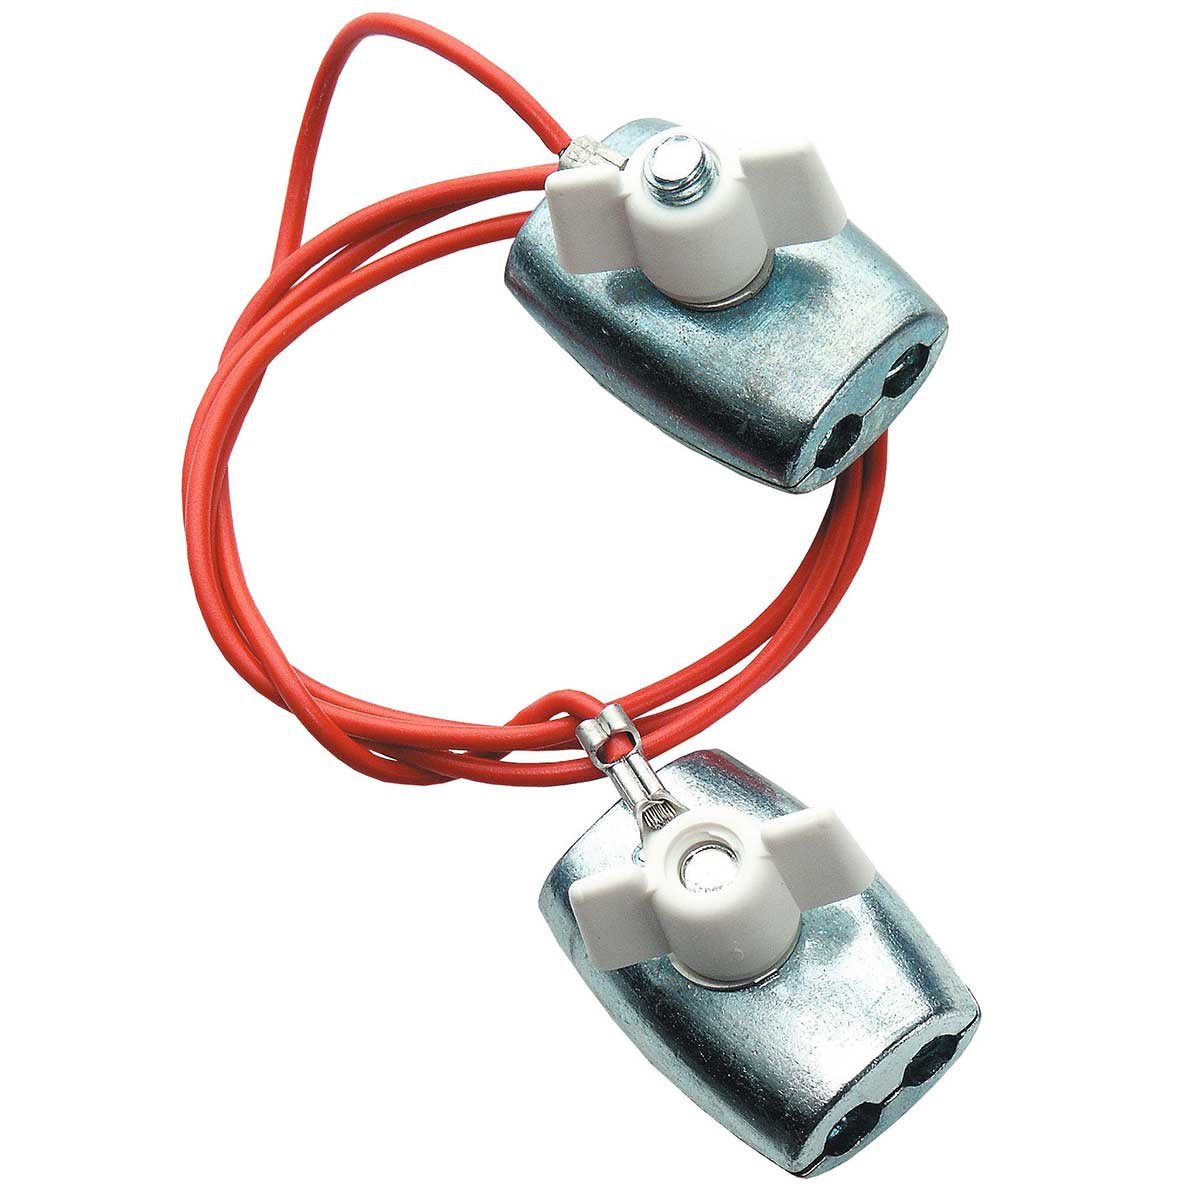 Rope-to-rope connector up to Ø 65 mm